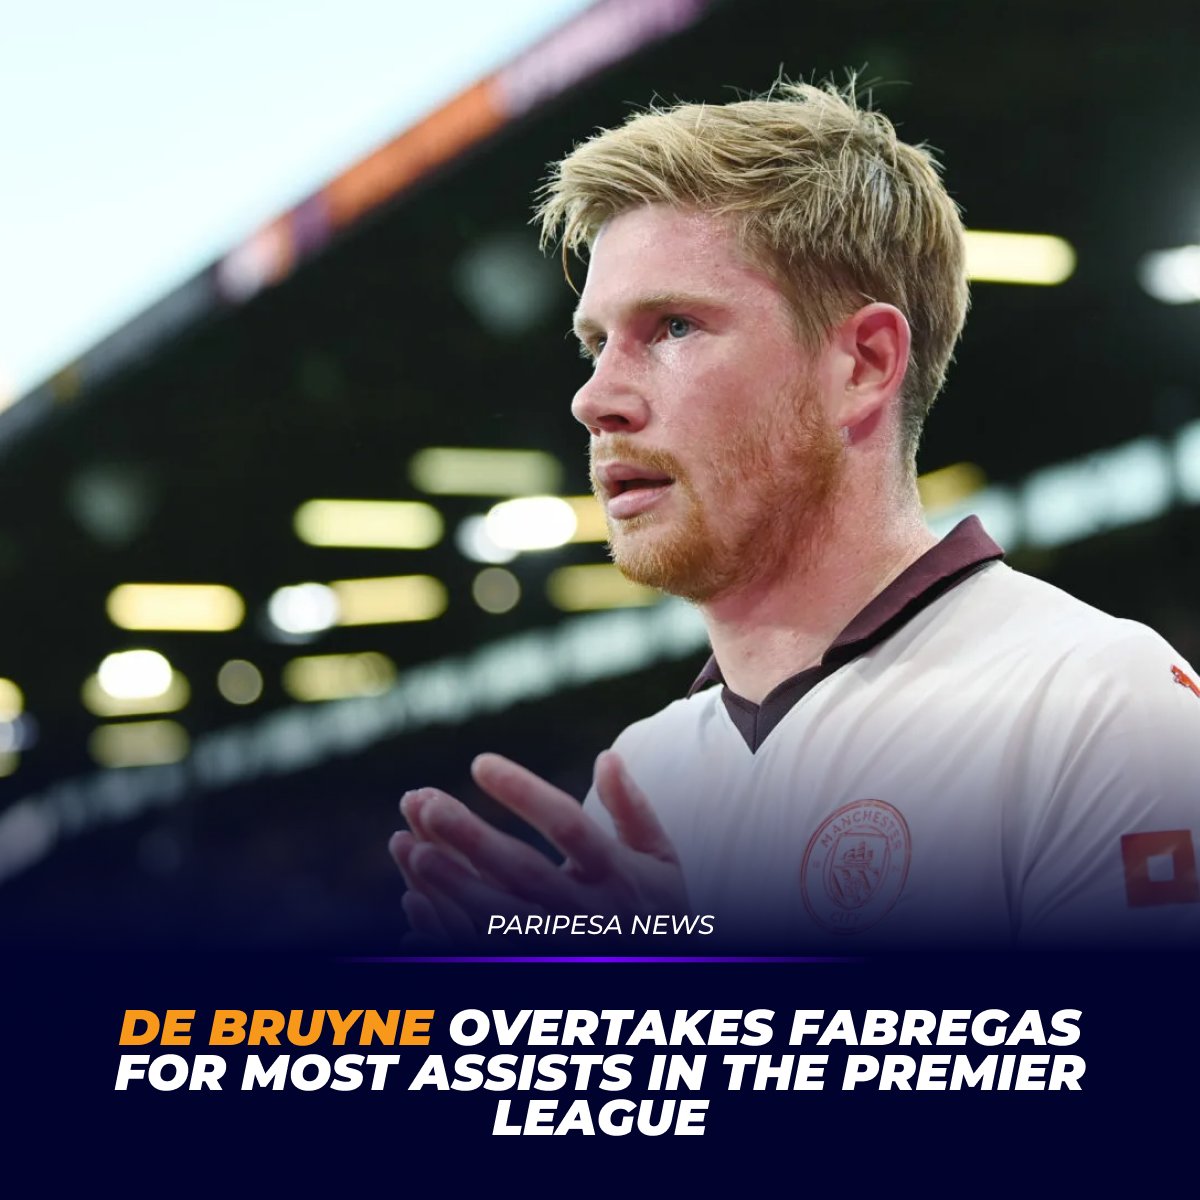 💪 De Bruyne overtakes Fabregas for most assists in the Premier League 1️⃣ Ryan Gigs - 168 🅰️ 2️⃣ Kevin De Bruyne - 111🅰️ 3️⃣ Cesc Fabregas - 111🅰️ 🤔 Will he catch up with the great Gigs? #debryune